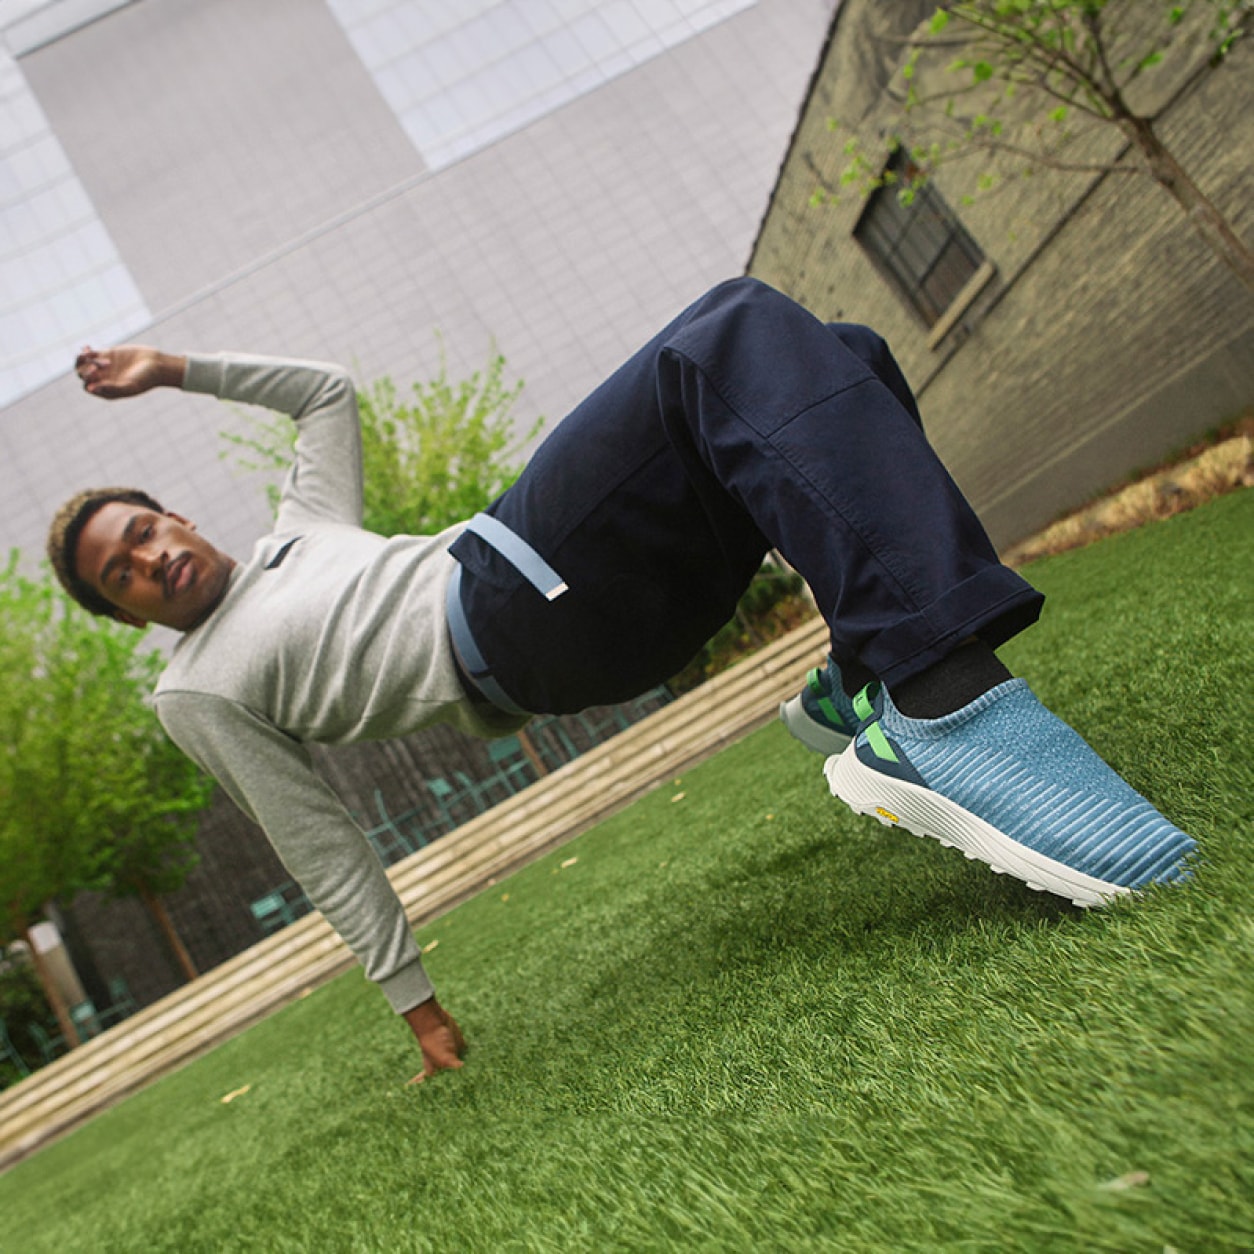 A person doing some cool dance moves in the grass, wearing embark mocs.